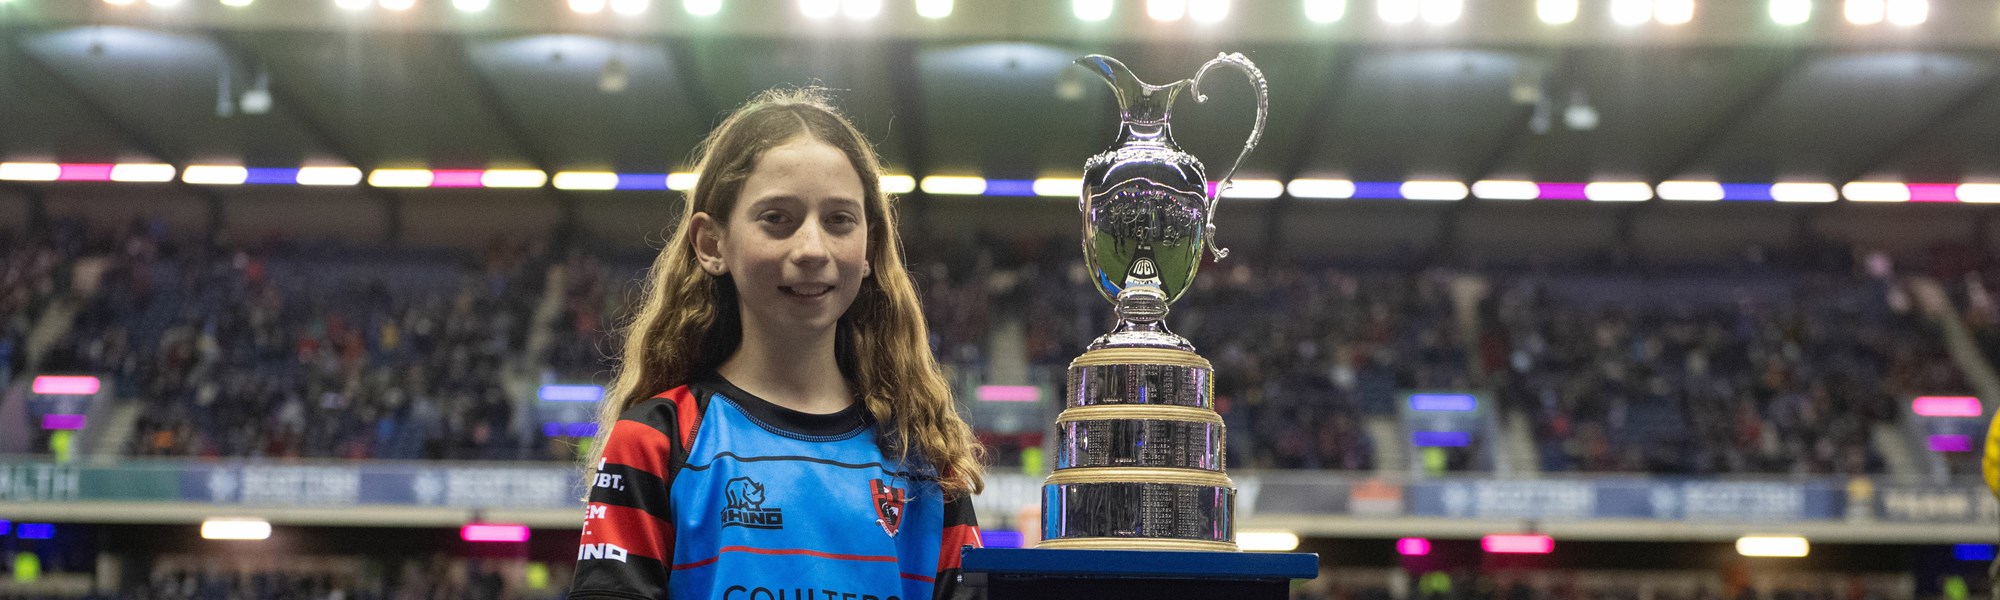 Background image: Congratulations to Lily from North Berwick RFC who was picked as our Edinburgh Rugby mascot 